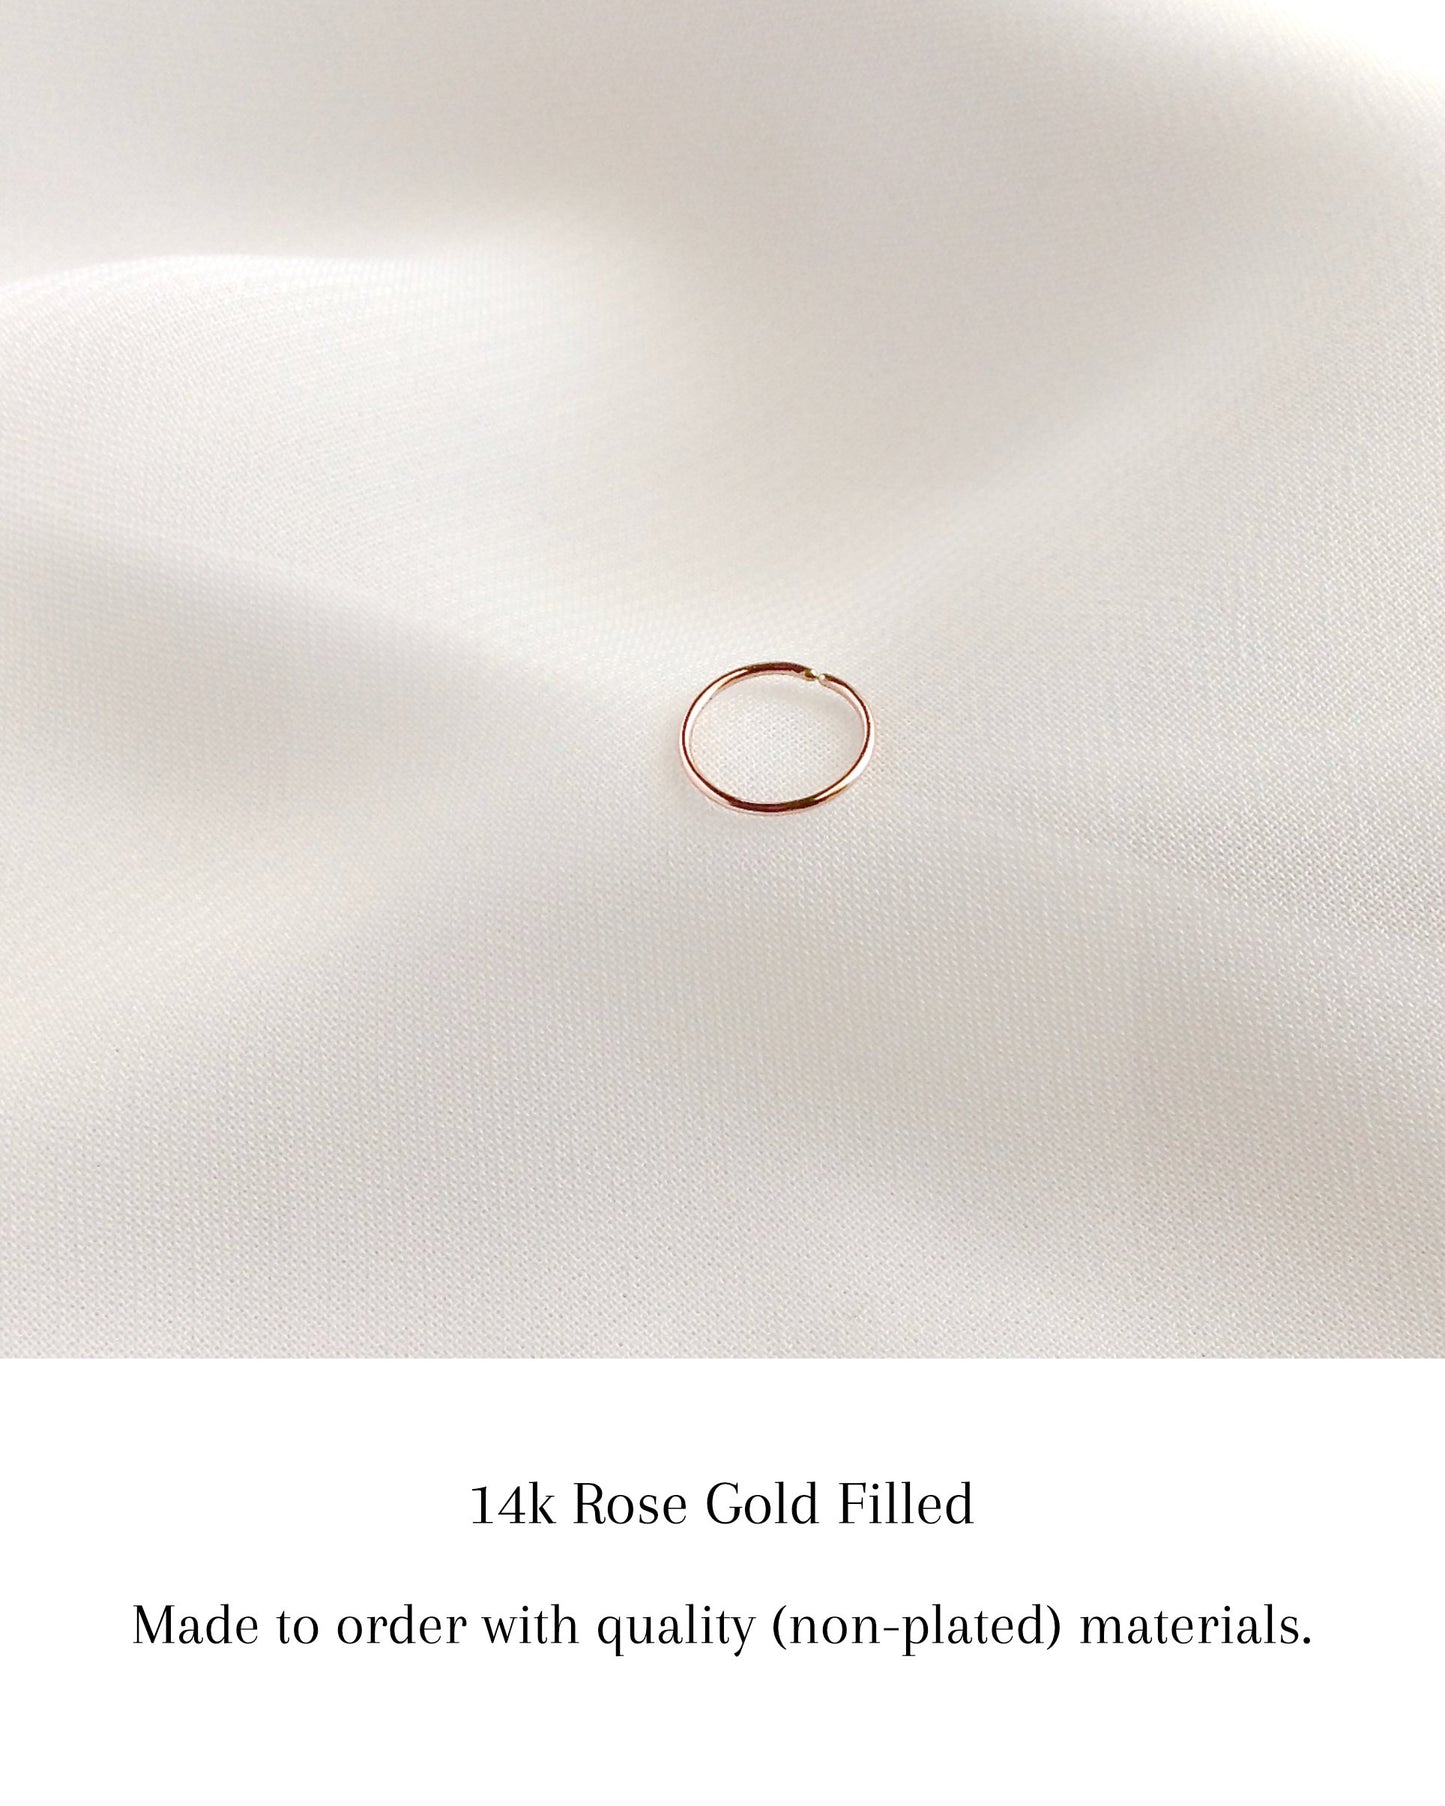 Rose Gold Filled Nose Hoop Quality Materials | IB Jewelry